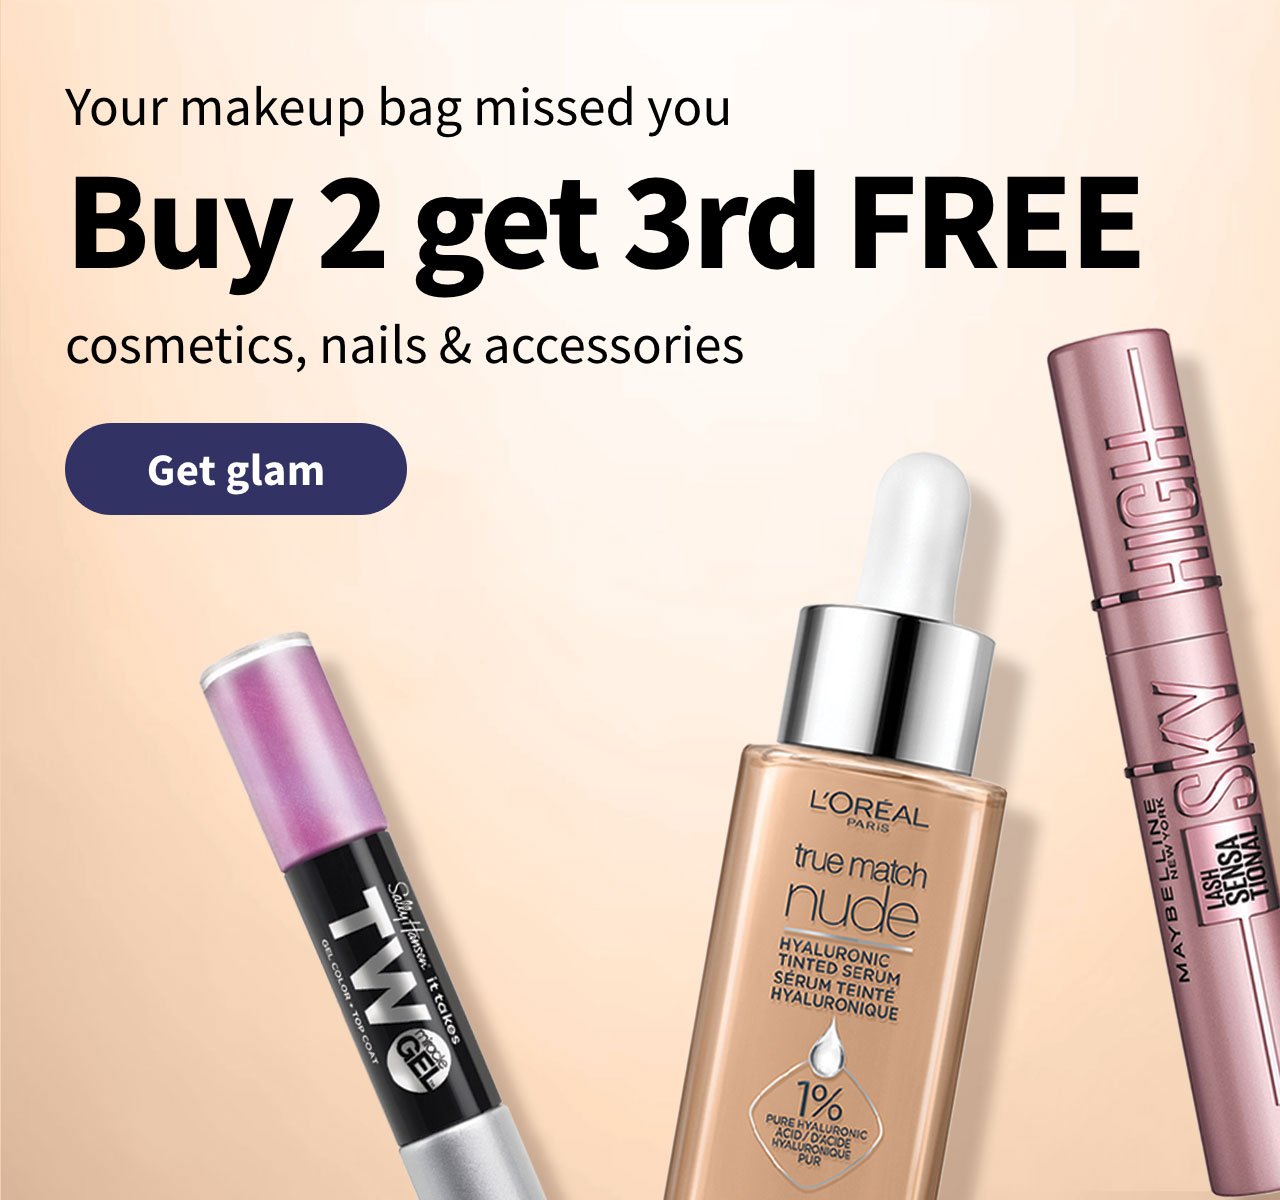 Your makeup bag missed you. Buy 2 get 3rd FREE cosmetics, nails & accessories. Get glam.